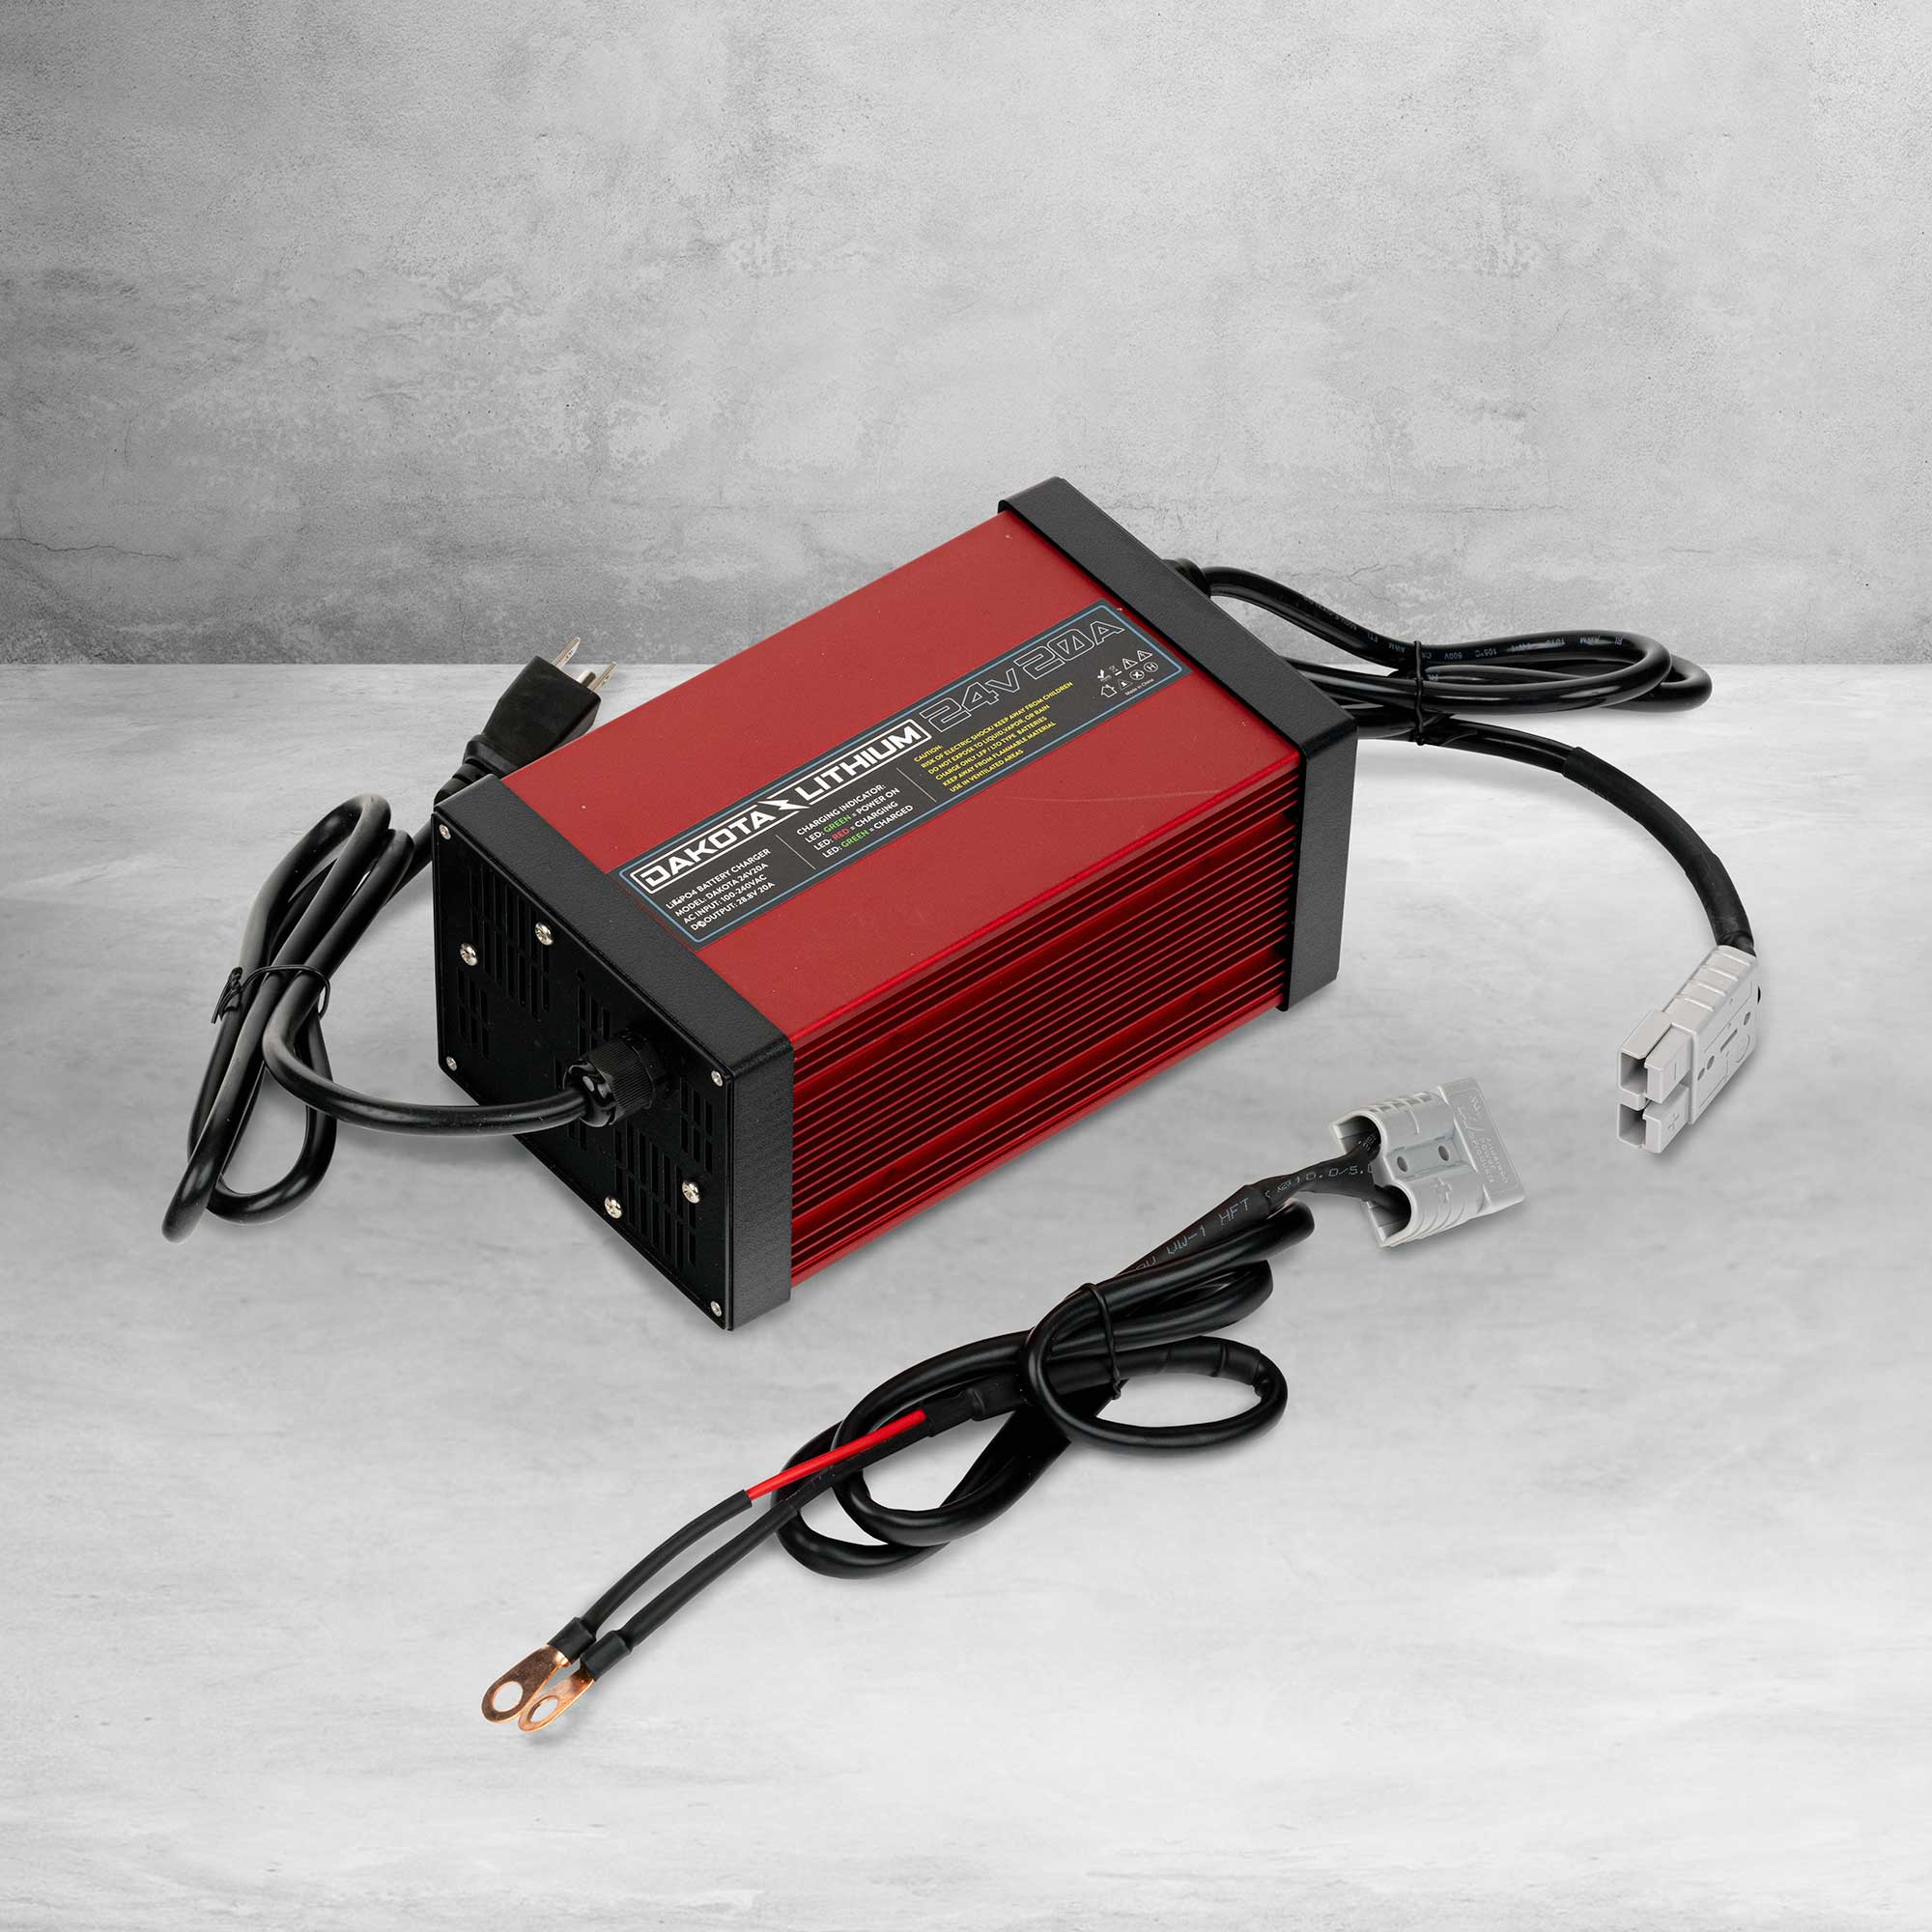 29.2v 10a 15a 30a Smart Fast Lifepo4lithium Battery Charger For